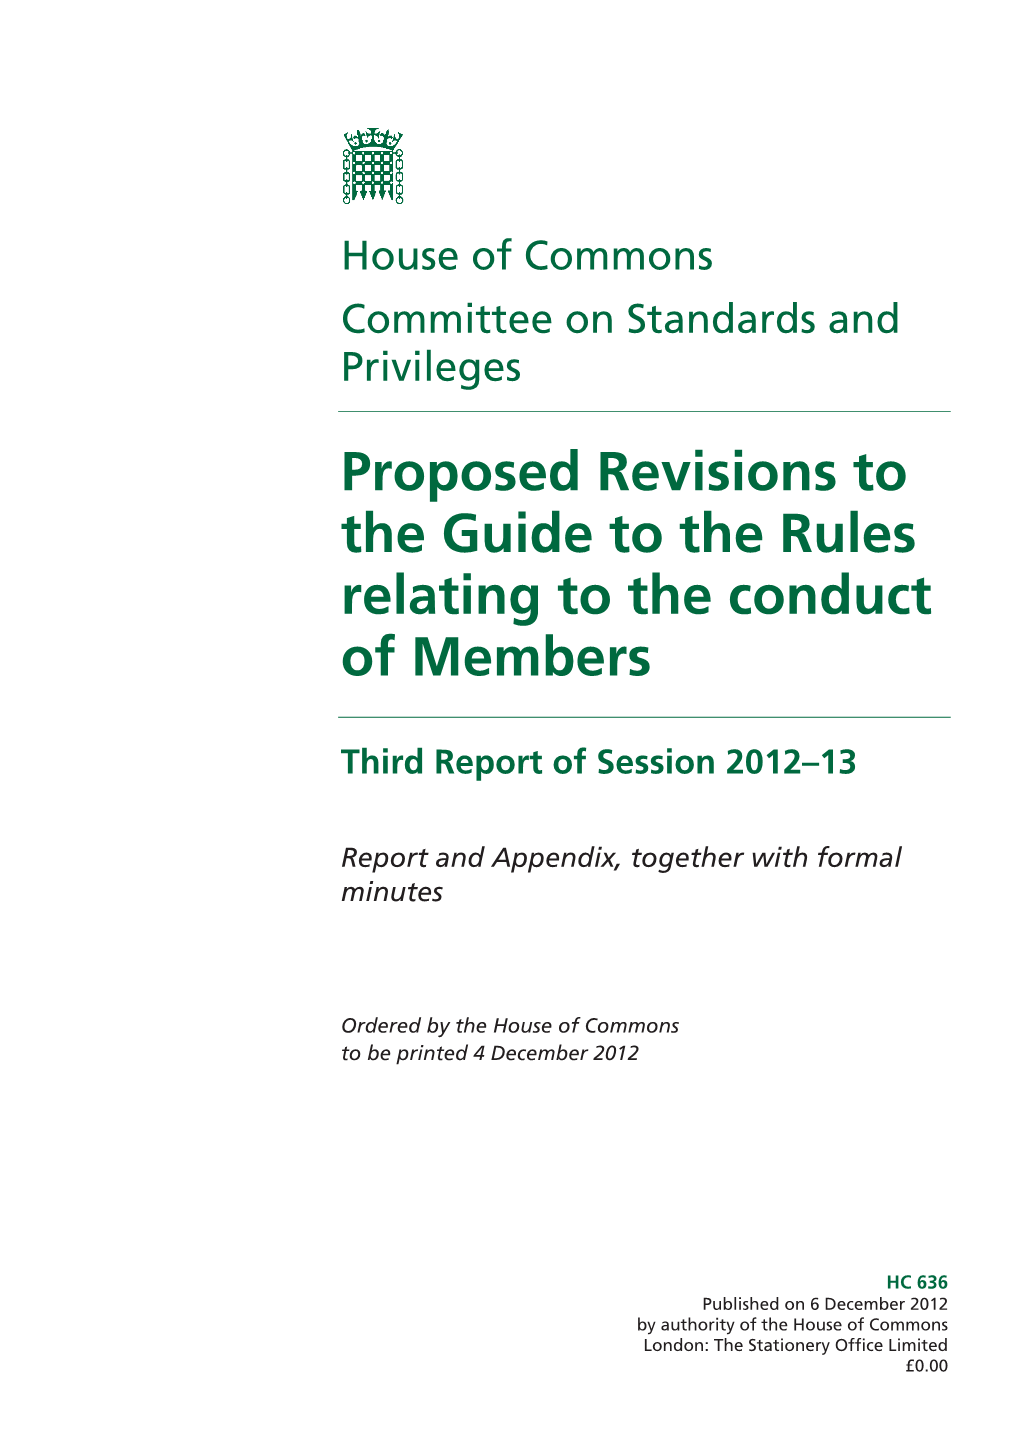 Proposed Revisions to the Guide to the Rules Relating to the Conduct of Members